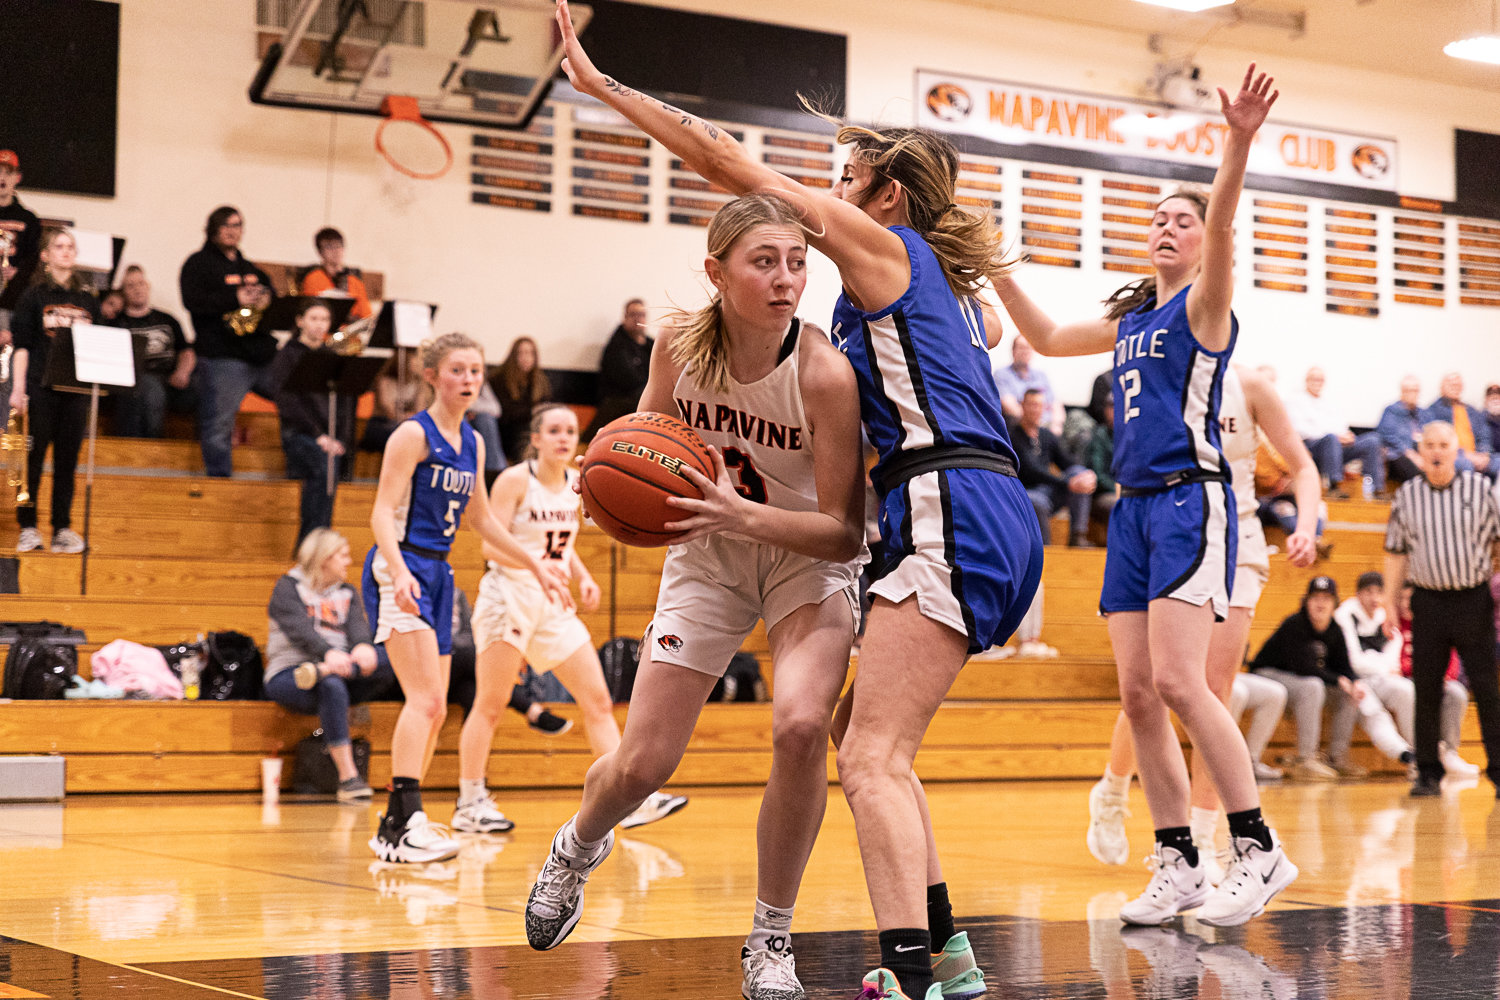 Napavine guard Hayden Kaut looks to pass from the under the basket against Toutle Lake Jan. 24.